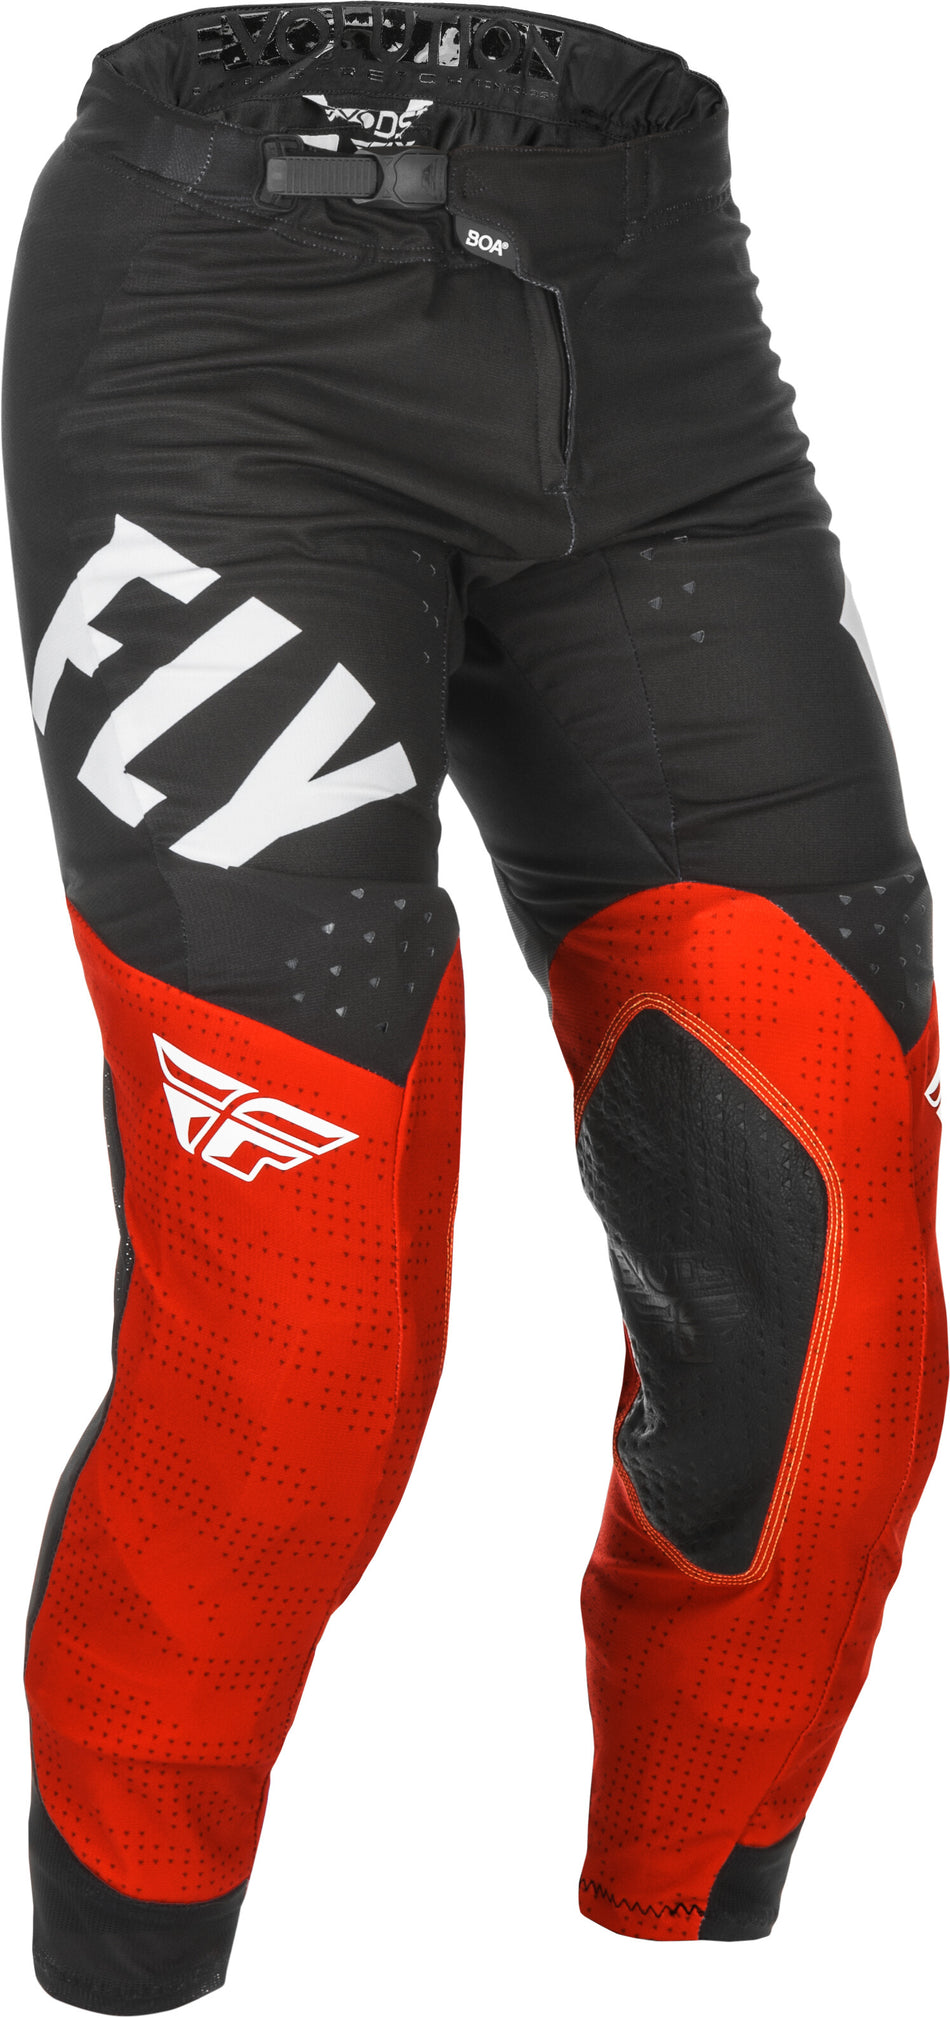 FLY RACING Evolution Dst Pants Red/Black/White Sz 32 374-13232